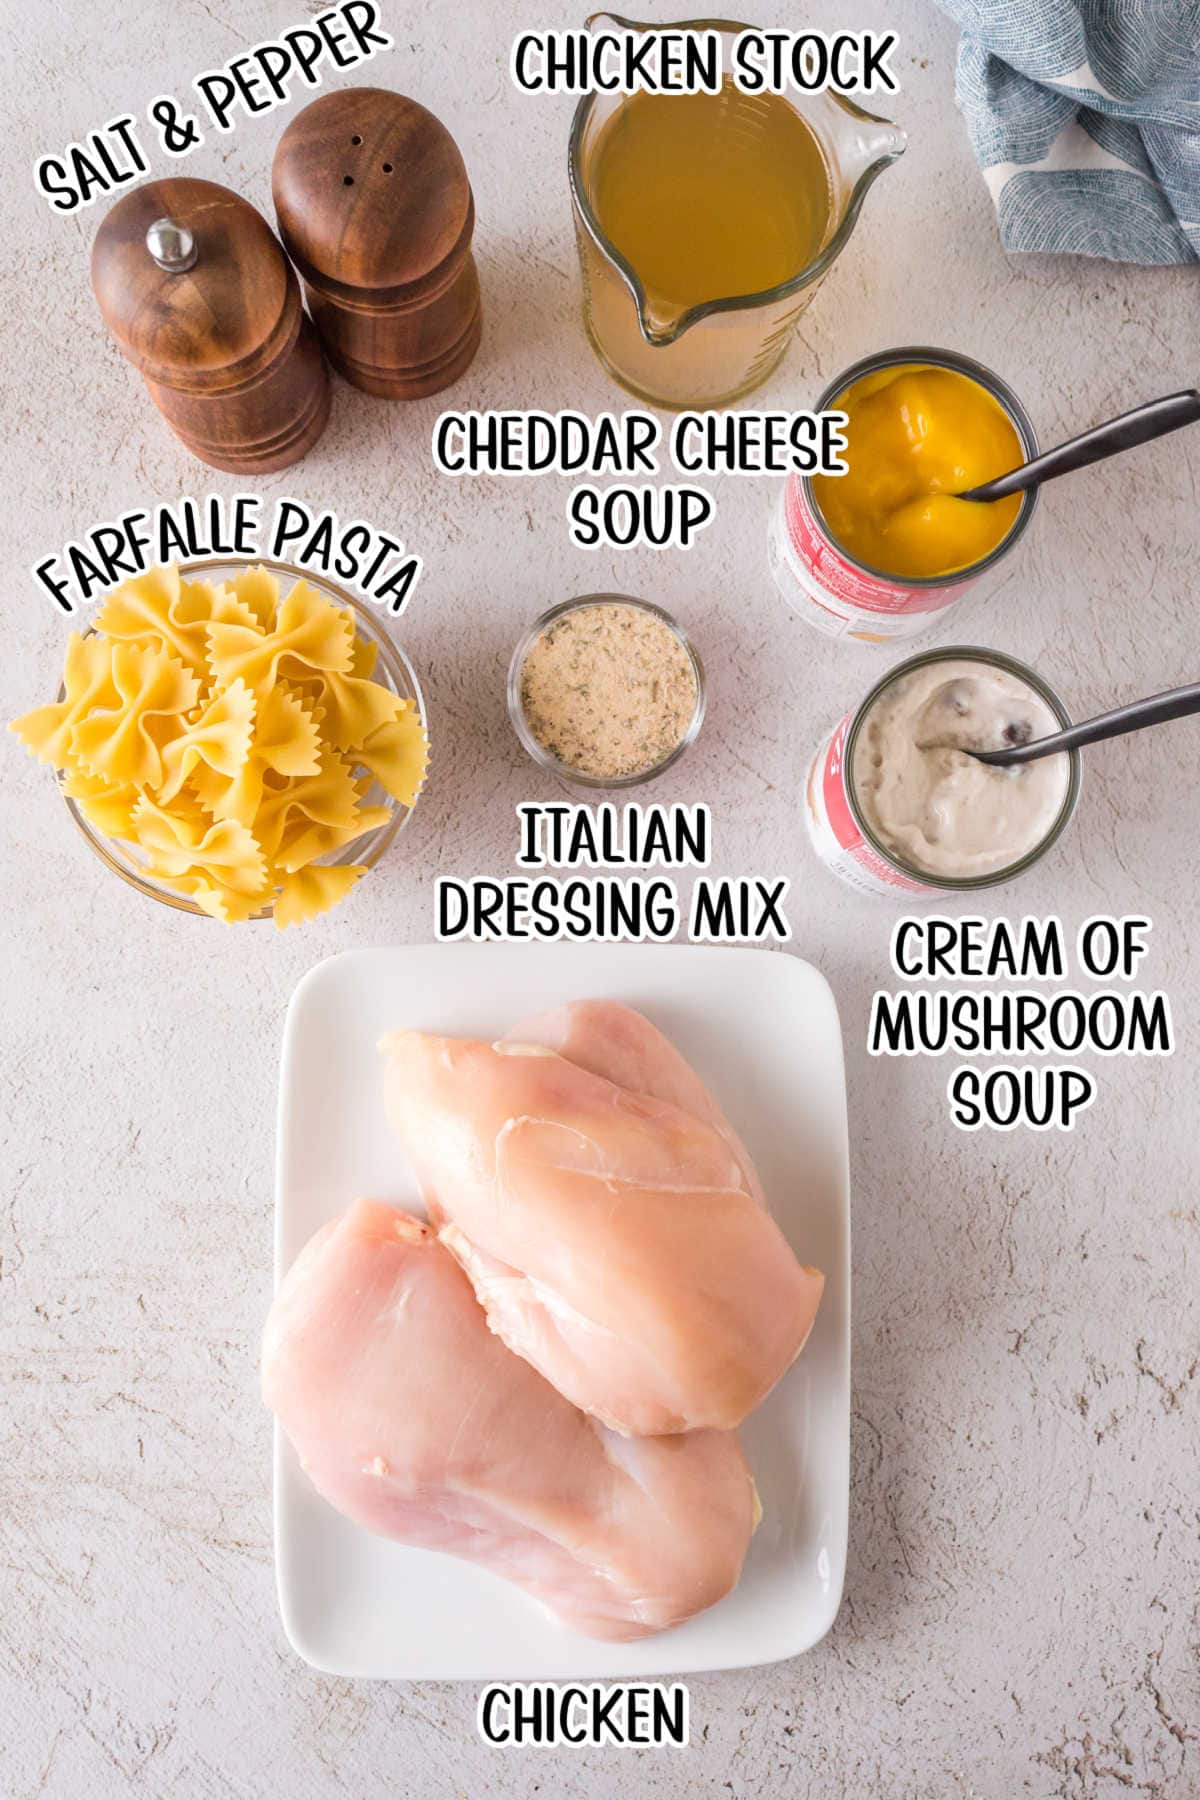 Labeled ingredients for this chicken recipe.